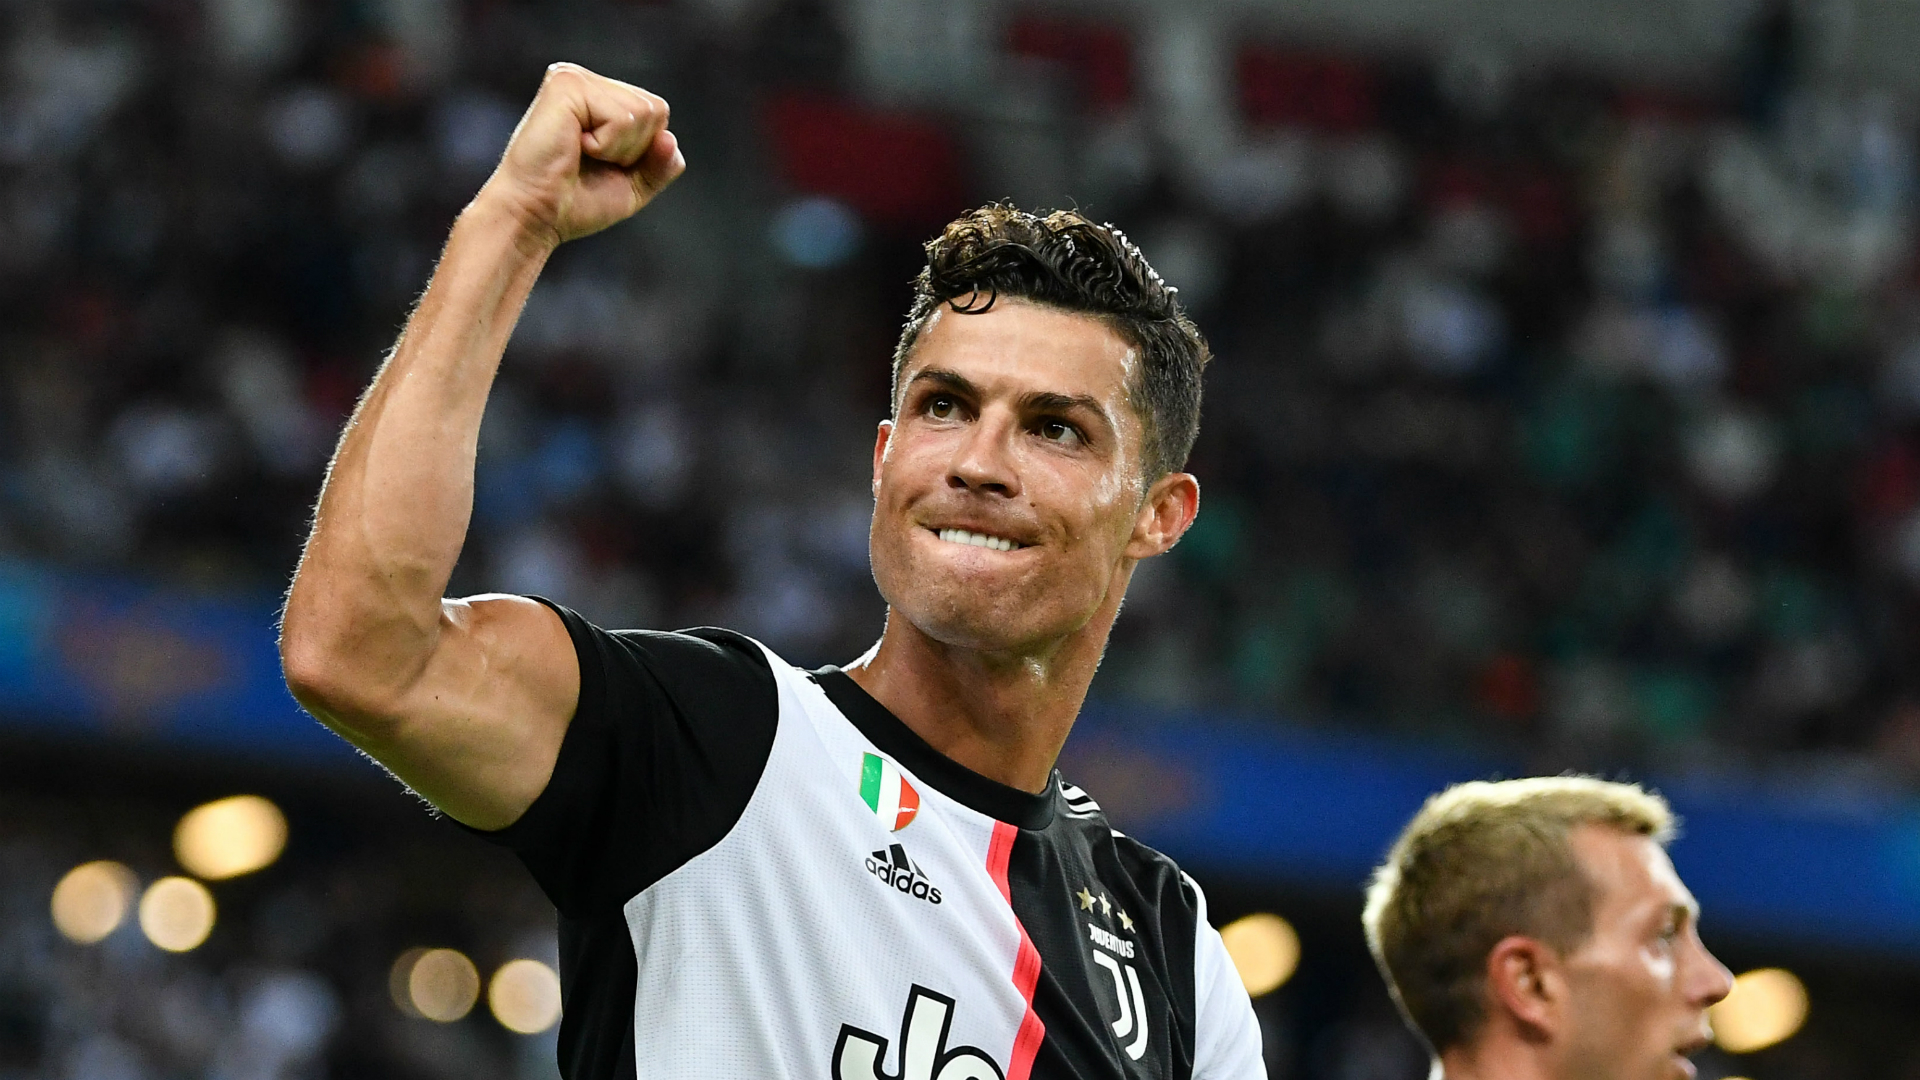 Cristiano Ronaldo, Serie A player of the year